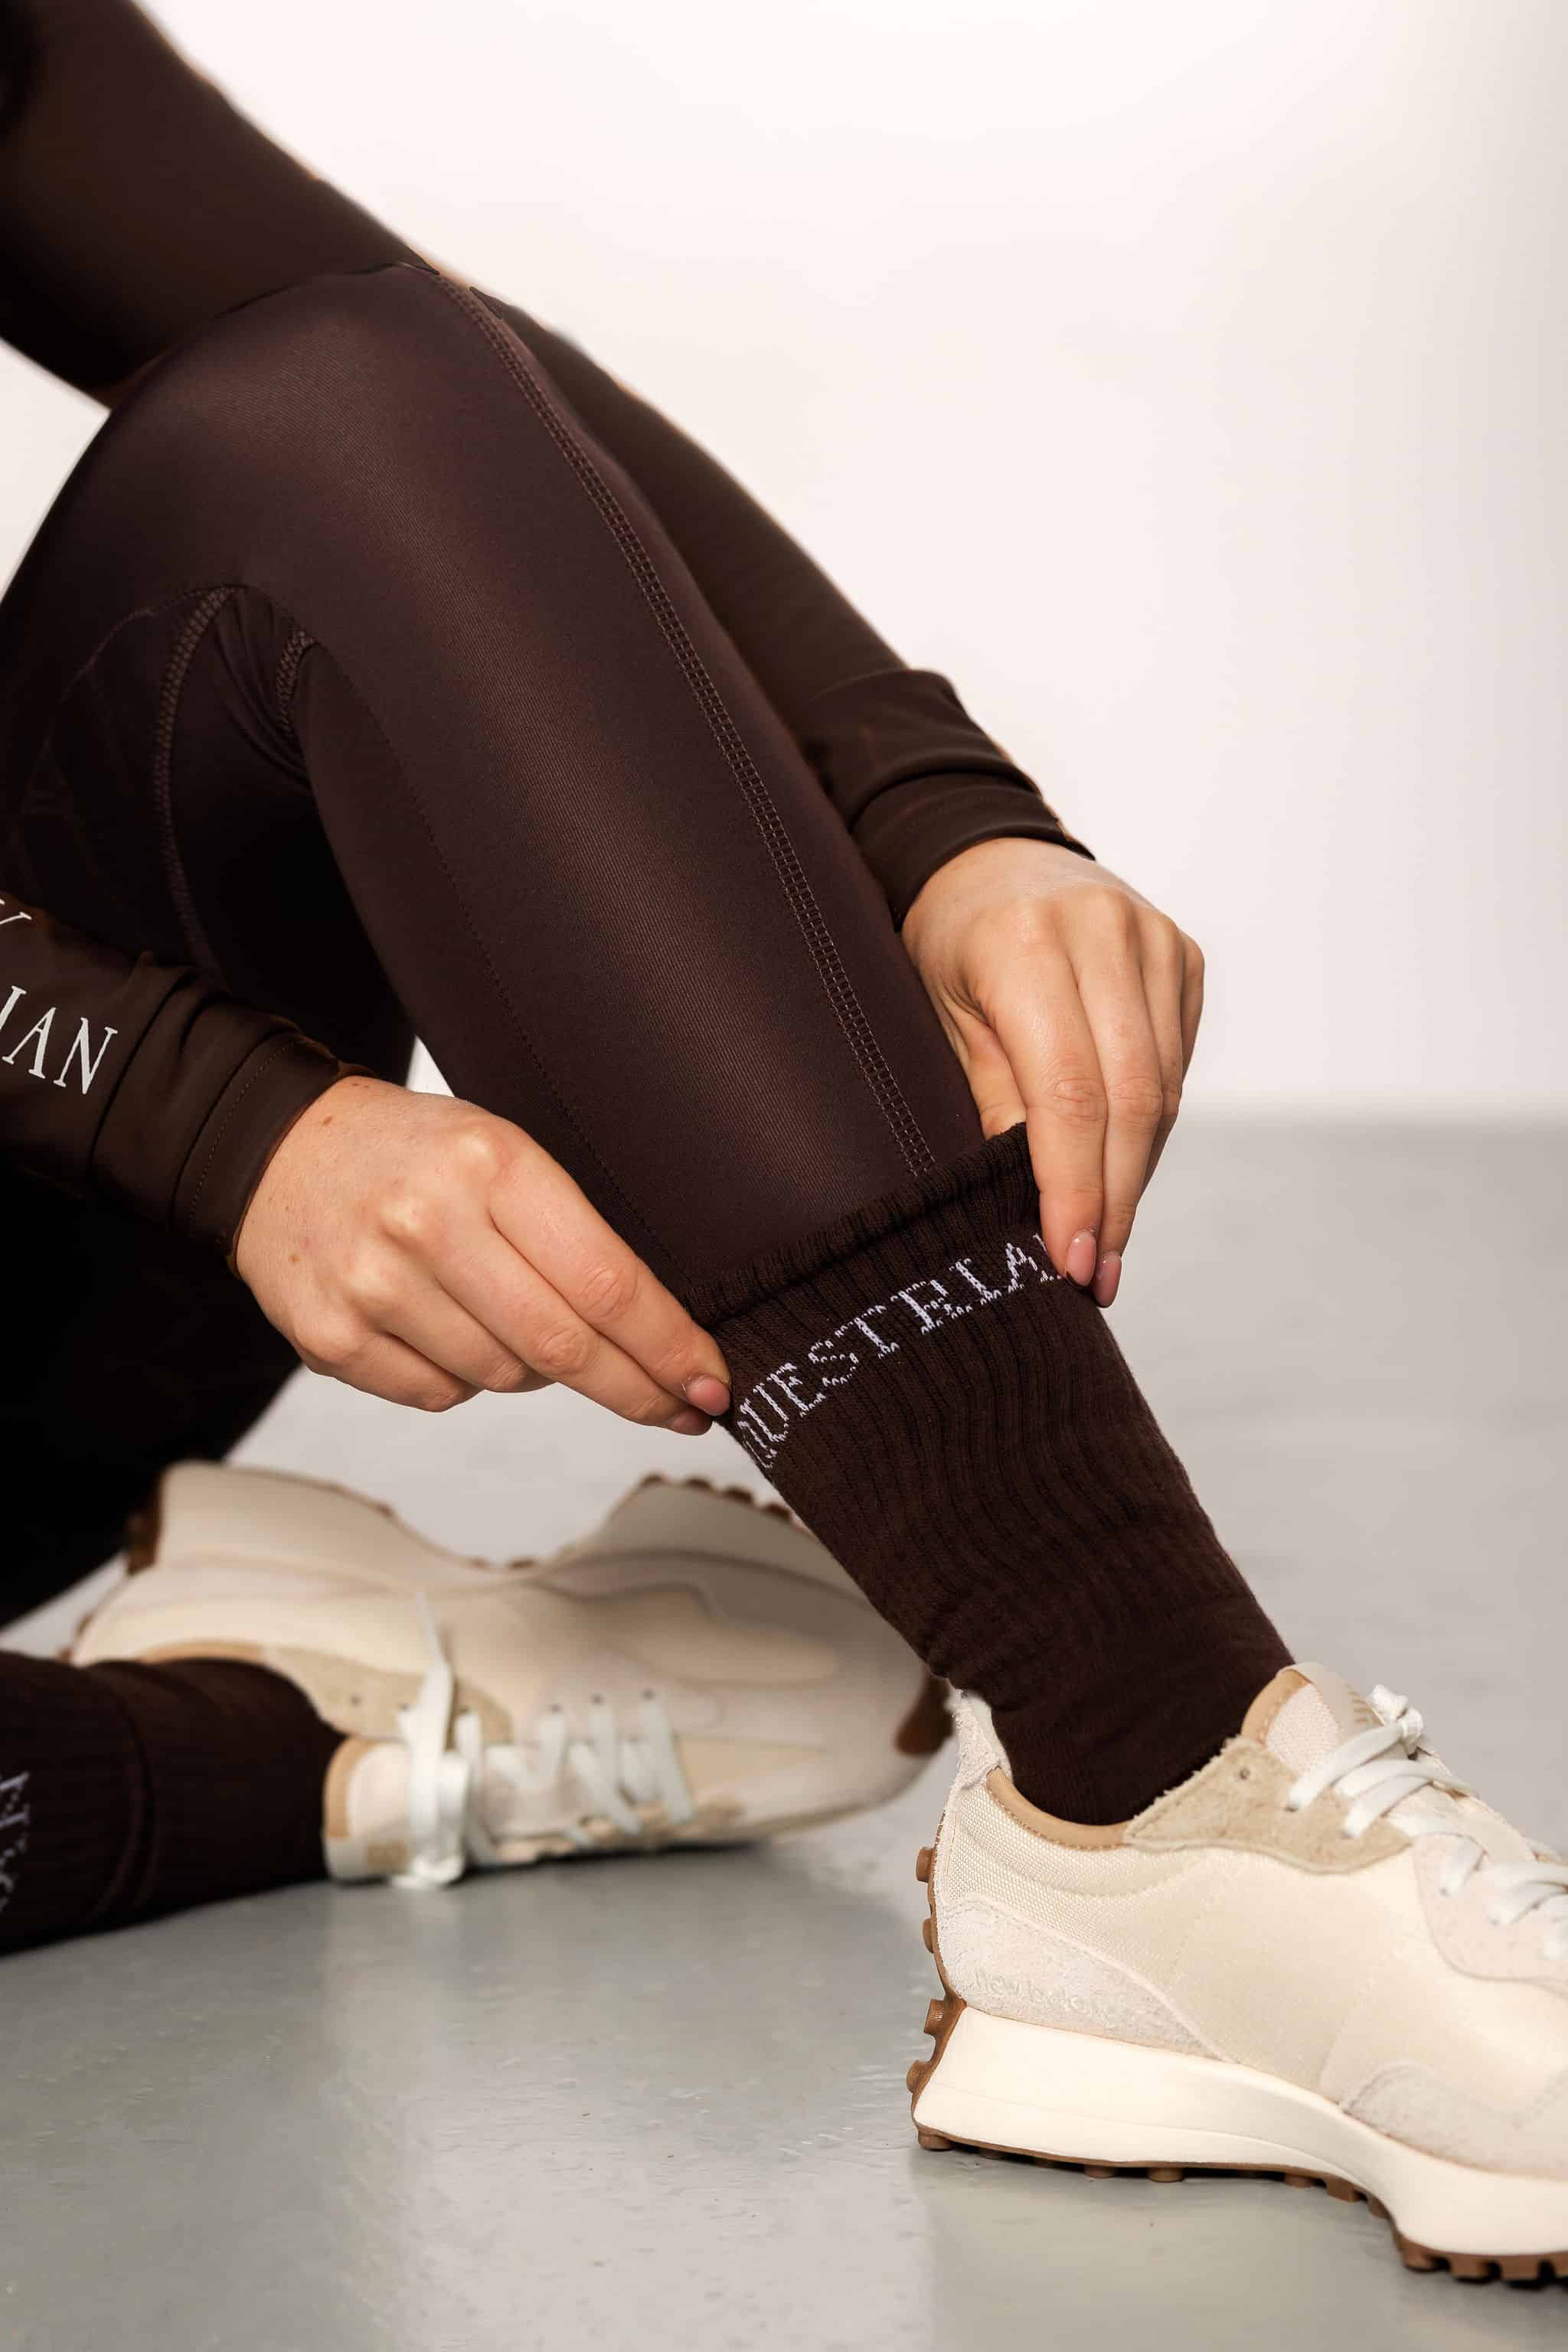 A close-up of our brown fleece lined leggings and matching brown socks.